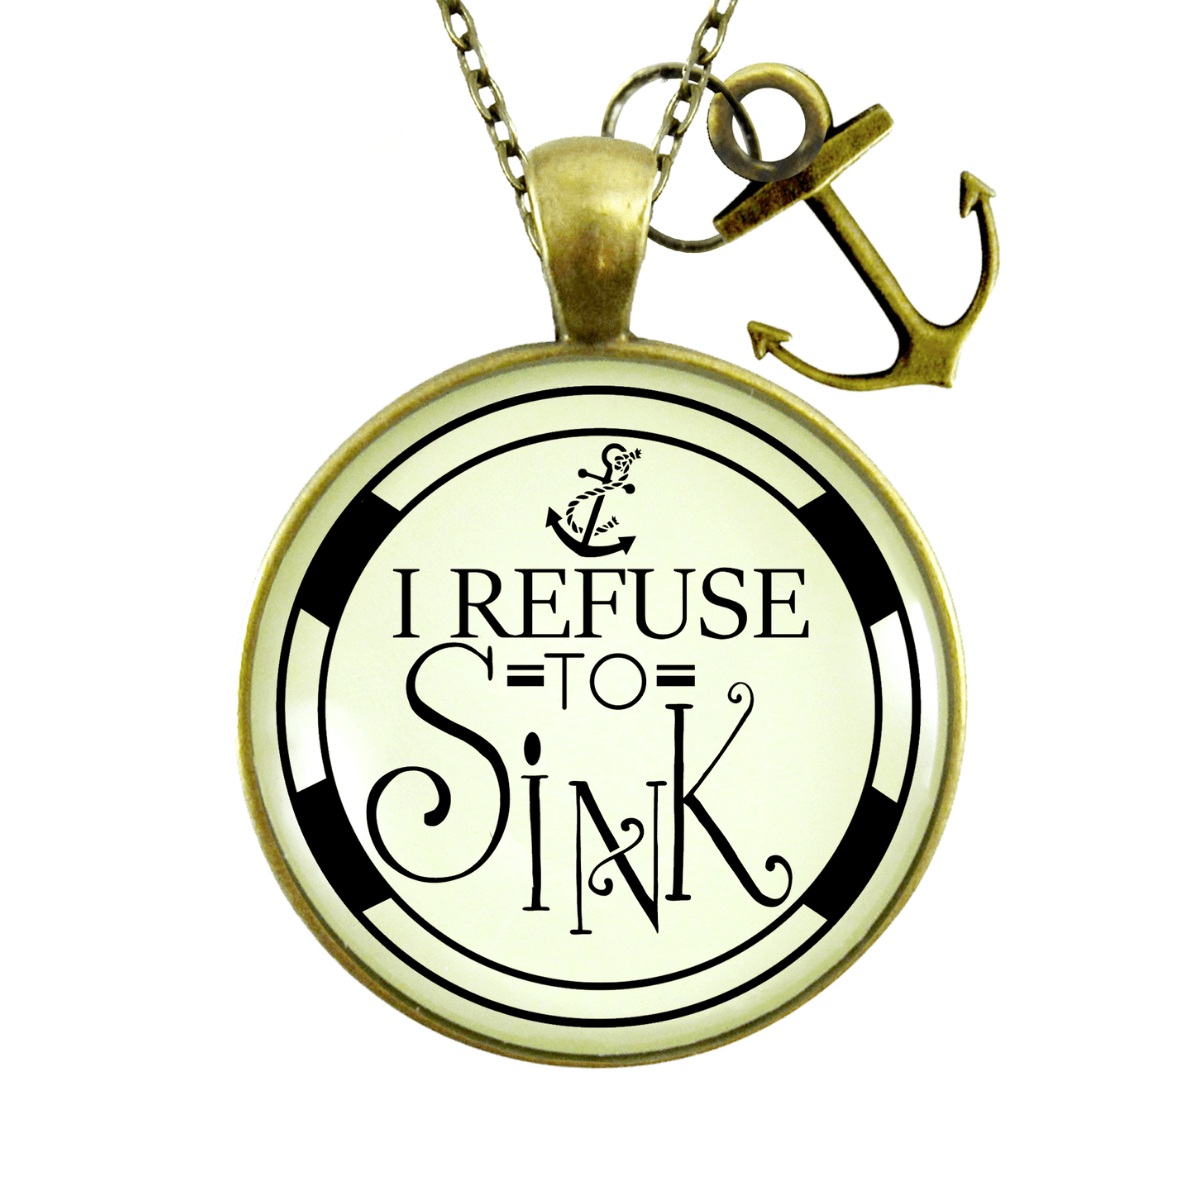 Anchor Necklace I Refuse to Sink Courage Nautical Theme Charm Jewelry - Gutsy Goodness Handmade Jewelry;Anchor Necklace I Refuse To Sink Courage Nautical Theme Charm Jewelry - Gutsy Goodness Handmade Jewelry Gifts